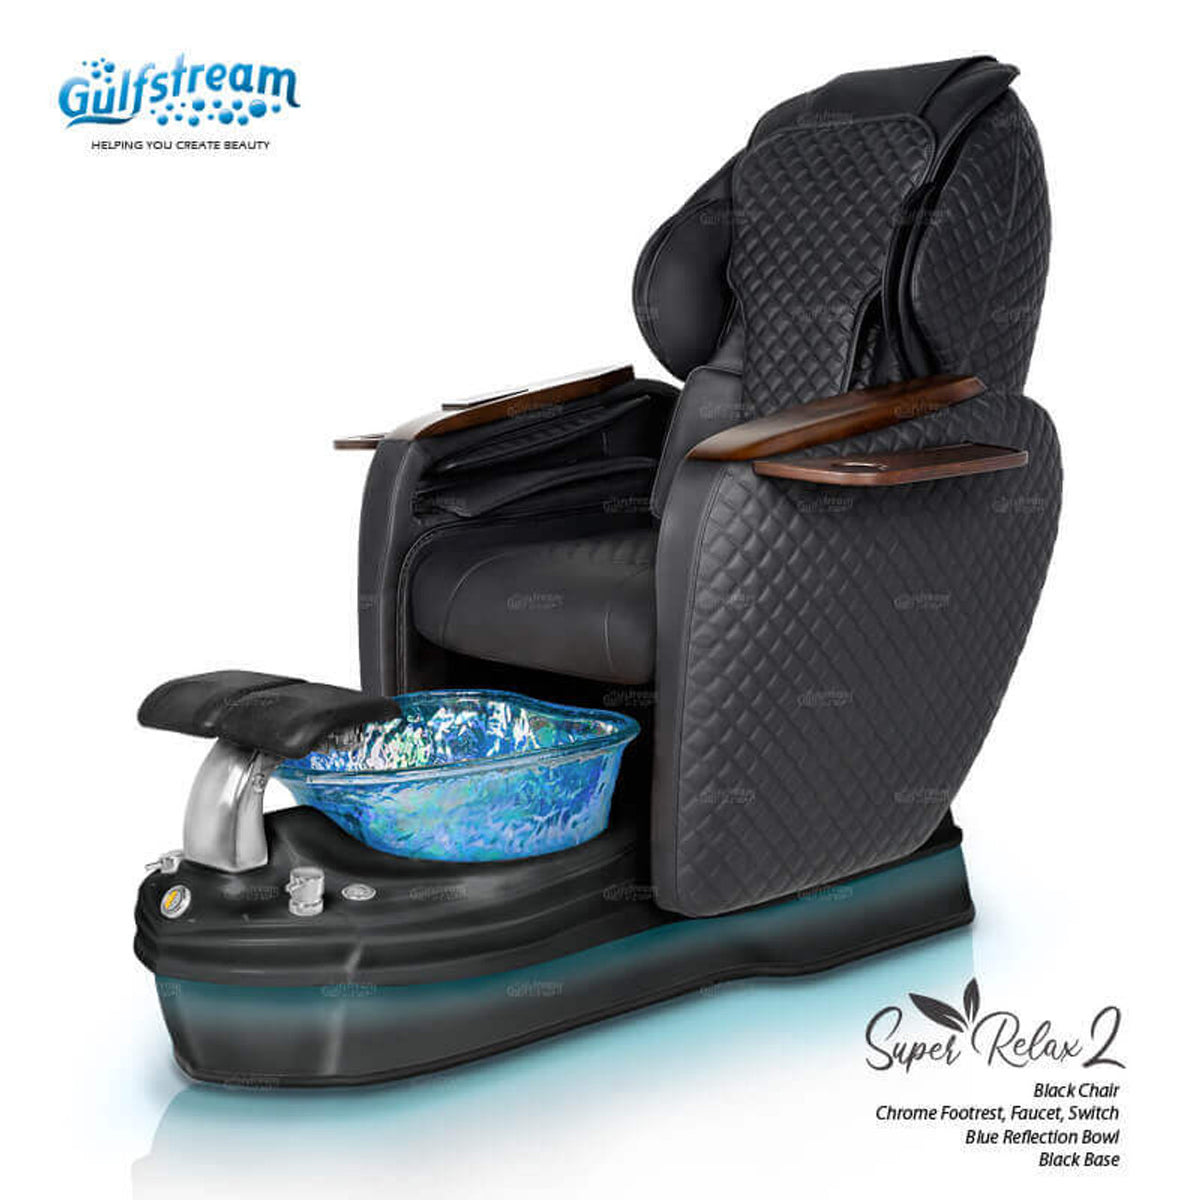 Gulfstream Super Relax 2 Spa &amp; Pedicure Chair with Waterdance System